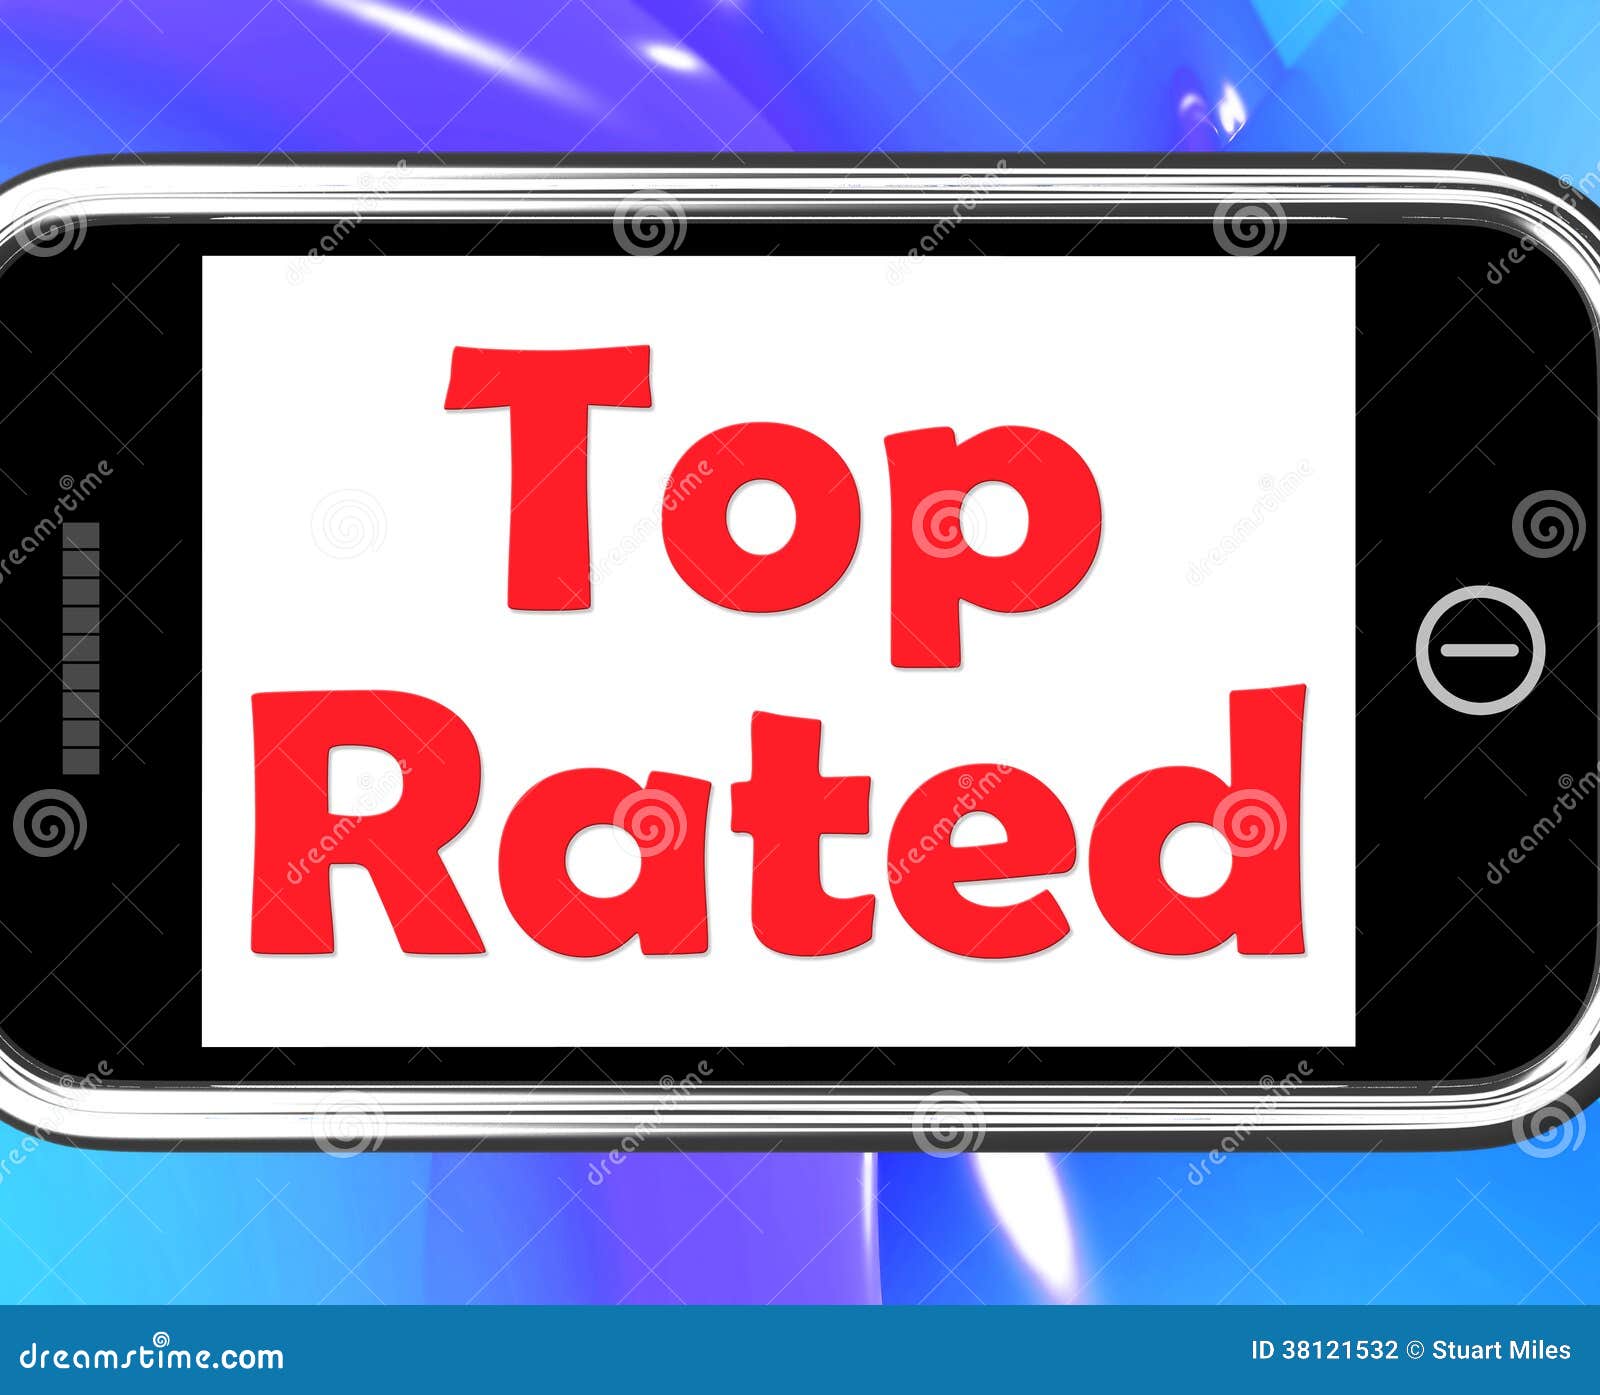 Top Rated on Phone Shows Best Ranked Special Product Stock Illustration